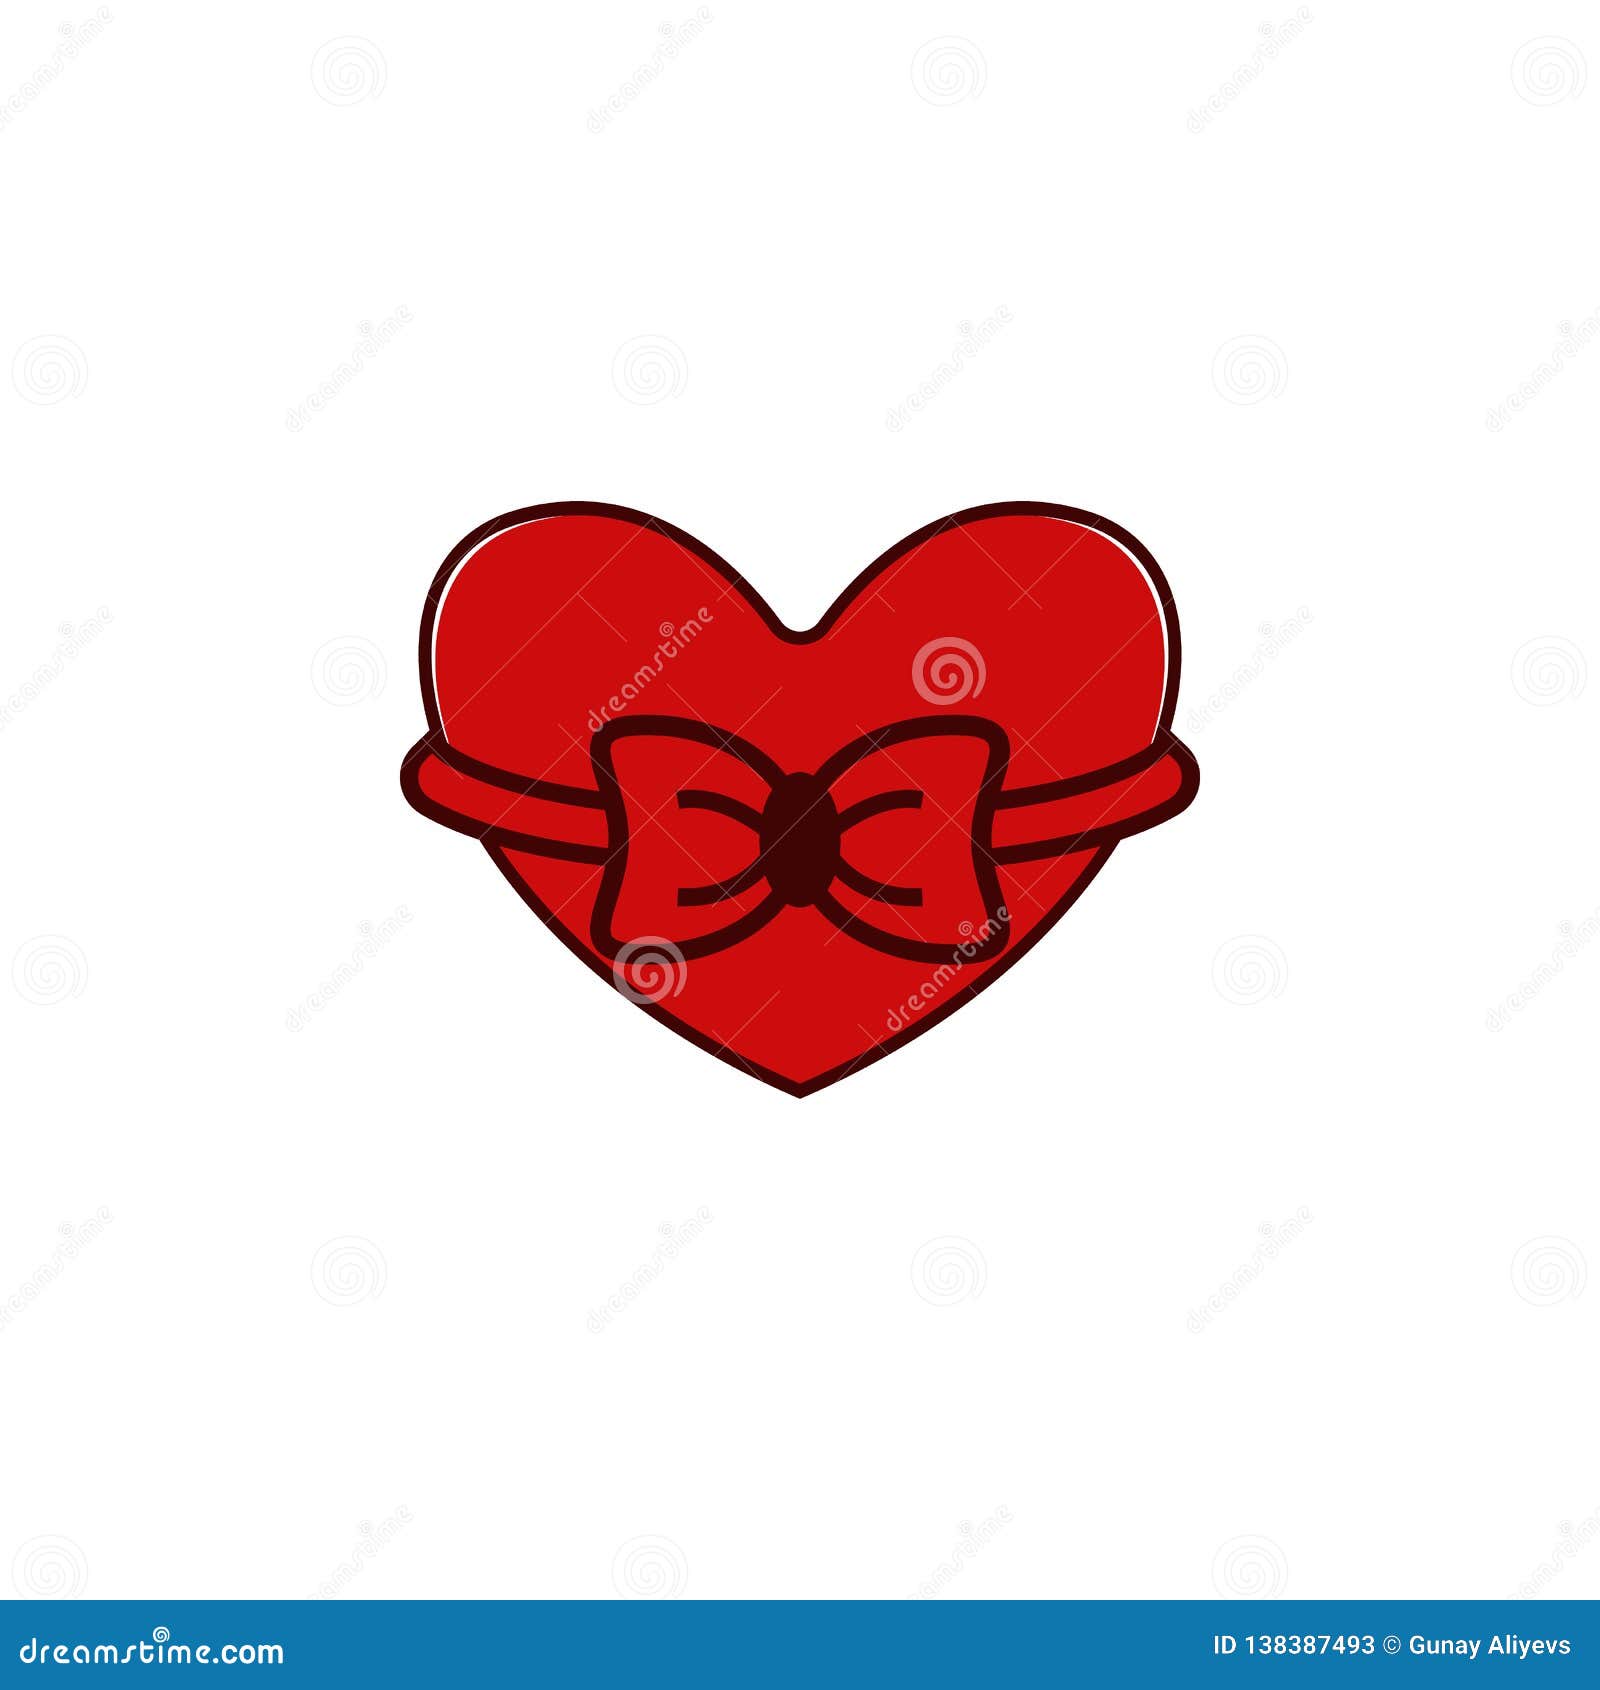 Red Ribbon Heart Valentines Love Sign Stock Photo - Image of